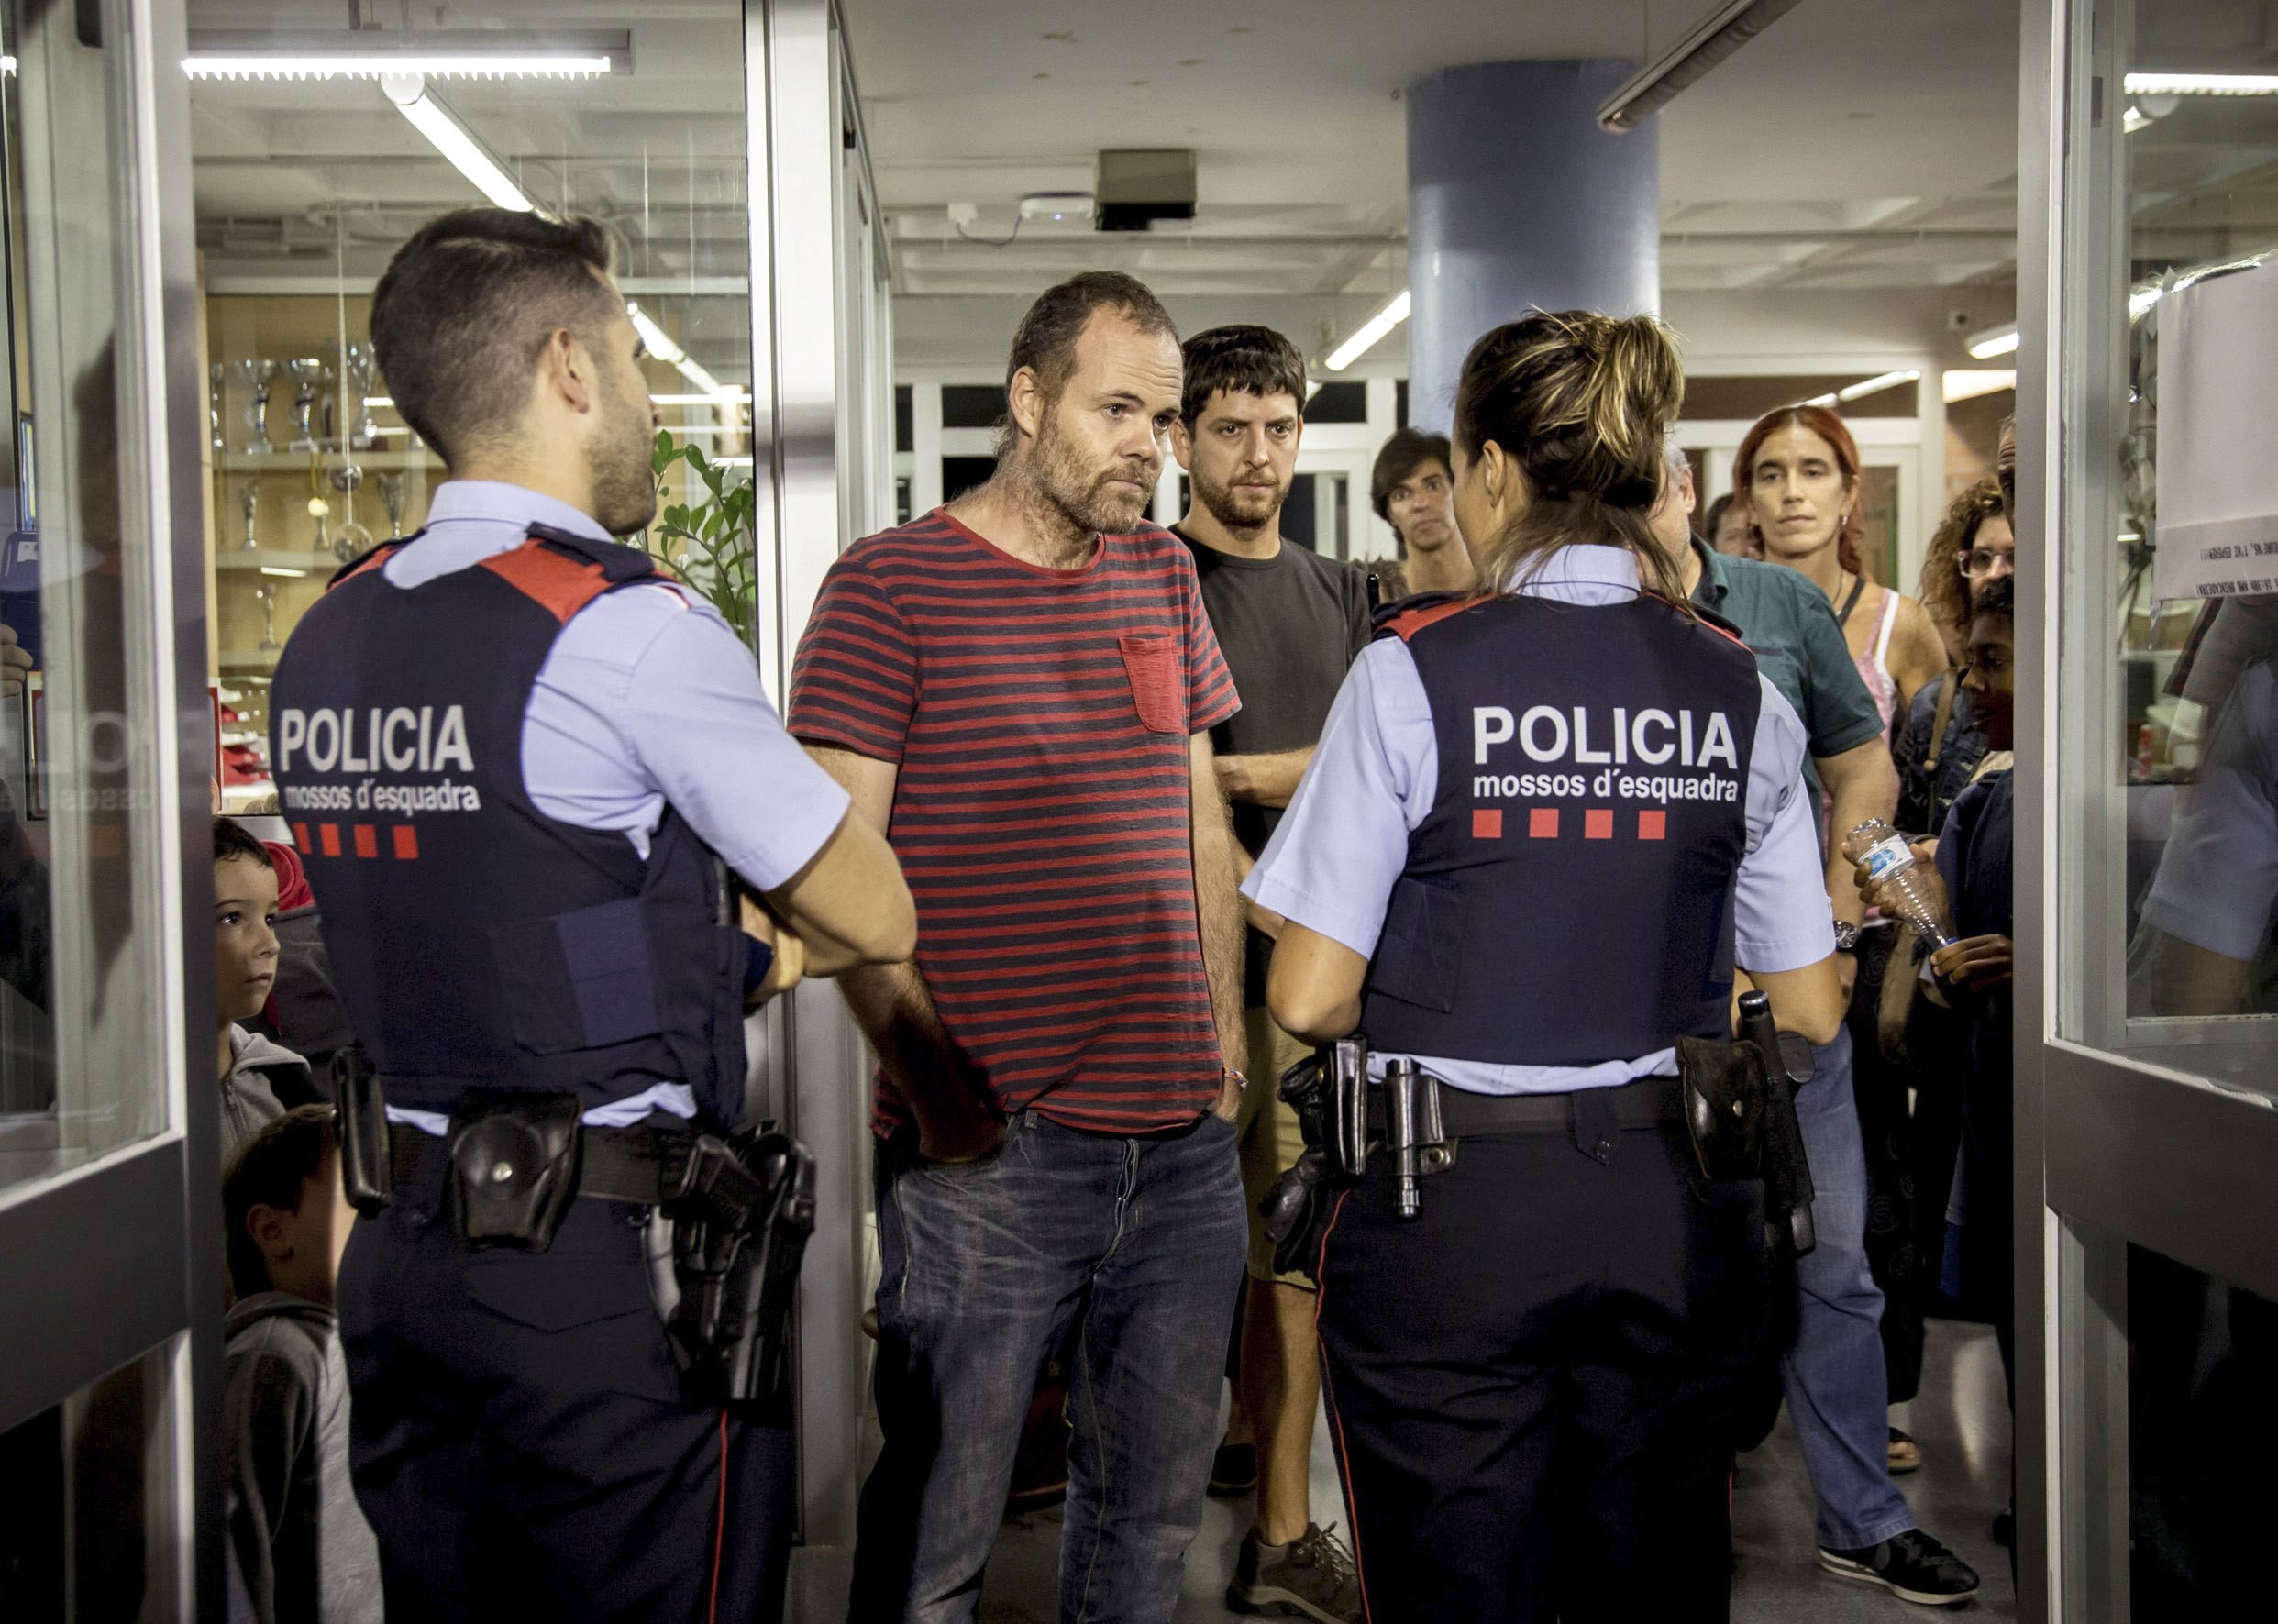 epa06236155 Catalan regional police (Mossos d'Esquadra) arrive to the Escola Auro school to notify it must be closed from 06.00 am on Sunday, in Barcelona, northeastern Spain, 29 September 2017 (issued 30 September 2017). Hundreds of people have spent the night in different schools and civic centers designated by the regional Government to be polling stations for the '1-O Referendum' in an attempt to prevent the police from avoid their use, as the Superior Court of Justice of Catalonia ordered. Catalonian Government has planned a total of 2,315 polling stations and 6,249 officials in charge of them in all the region, as well as some 7,235 people in charge of securing the chances to vote to some 5,343.358 Catalans. Until the date, the Catalan police (Mossos d'Esquadra) has checked some 1,300 polling stations, of which 163 have been occupied at the moment, meaning a 12 per cent of the total number.  EPA/Enric Fontcuberta  EPA-EFE/Biel Alino